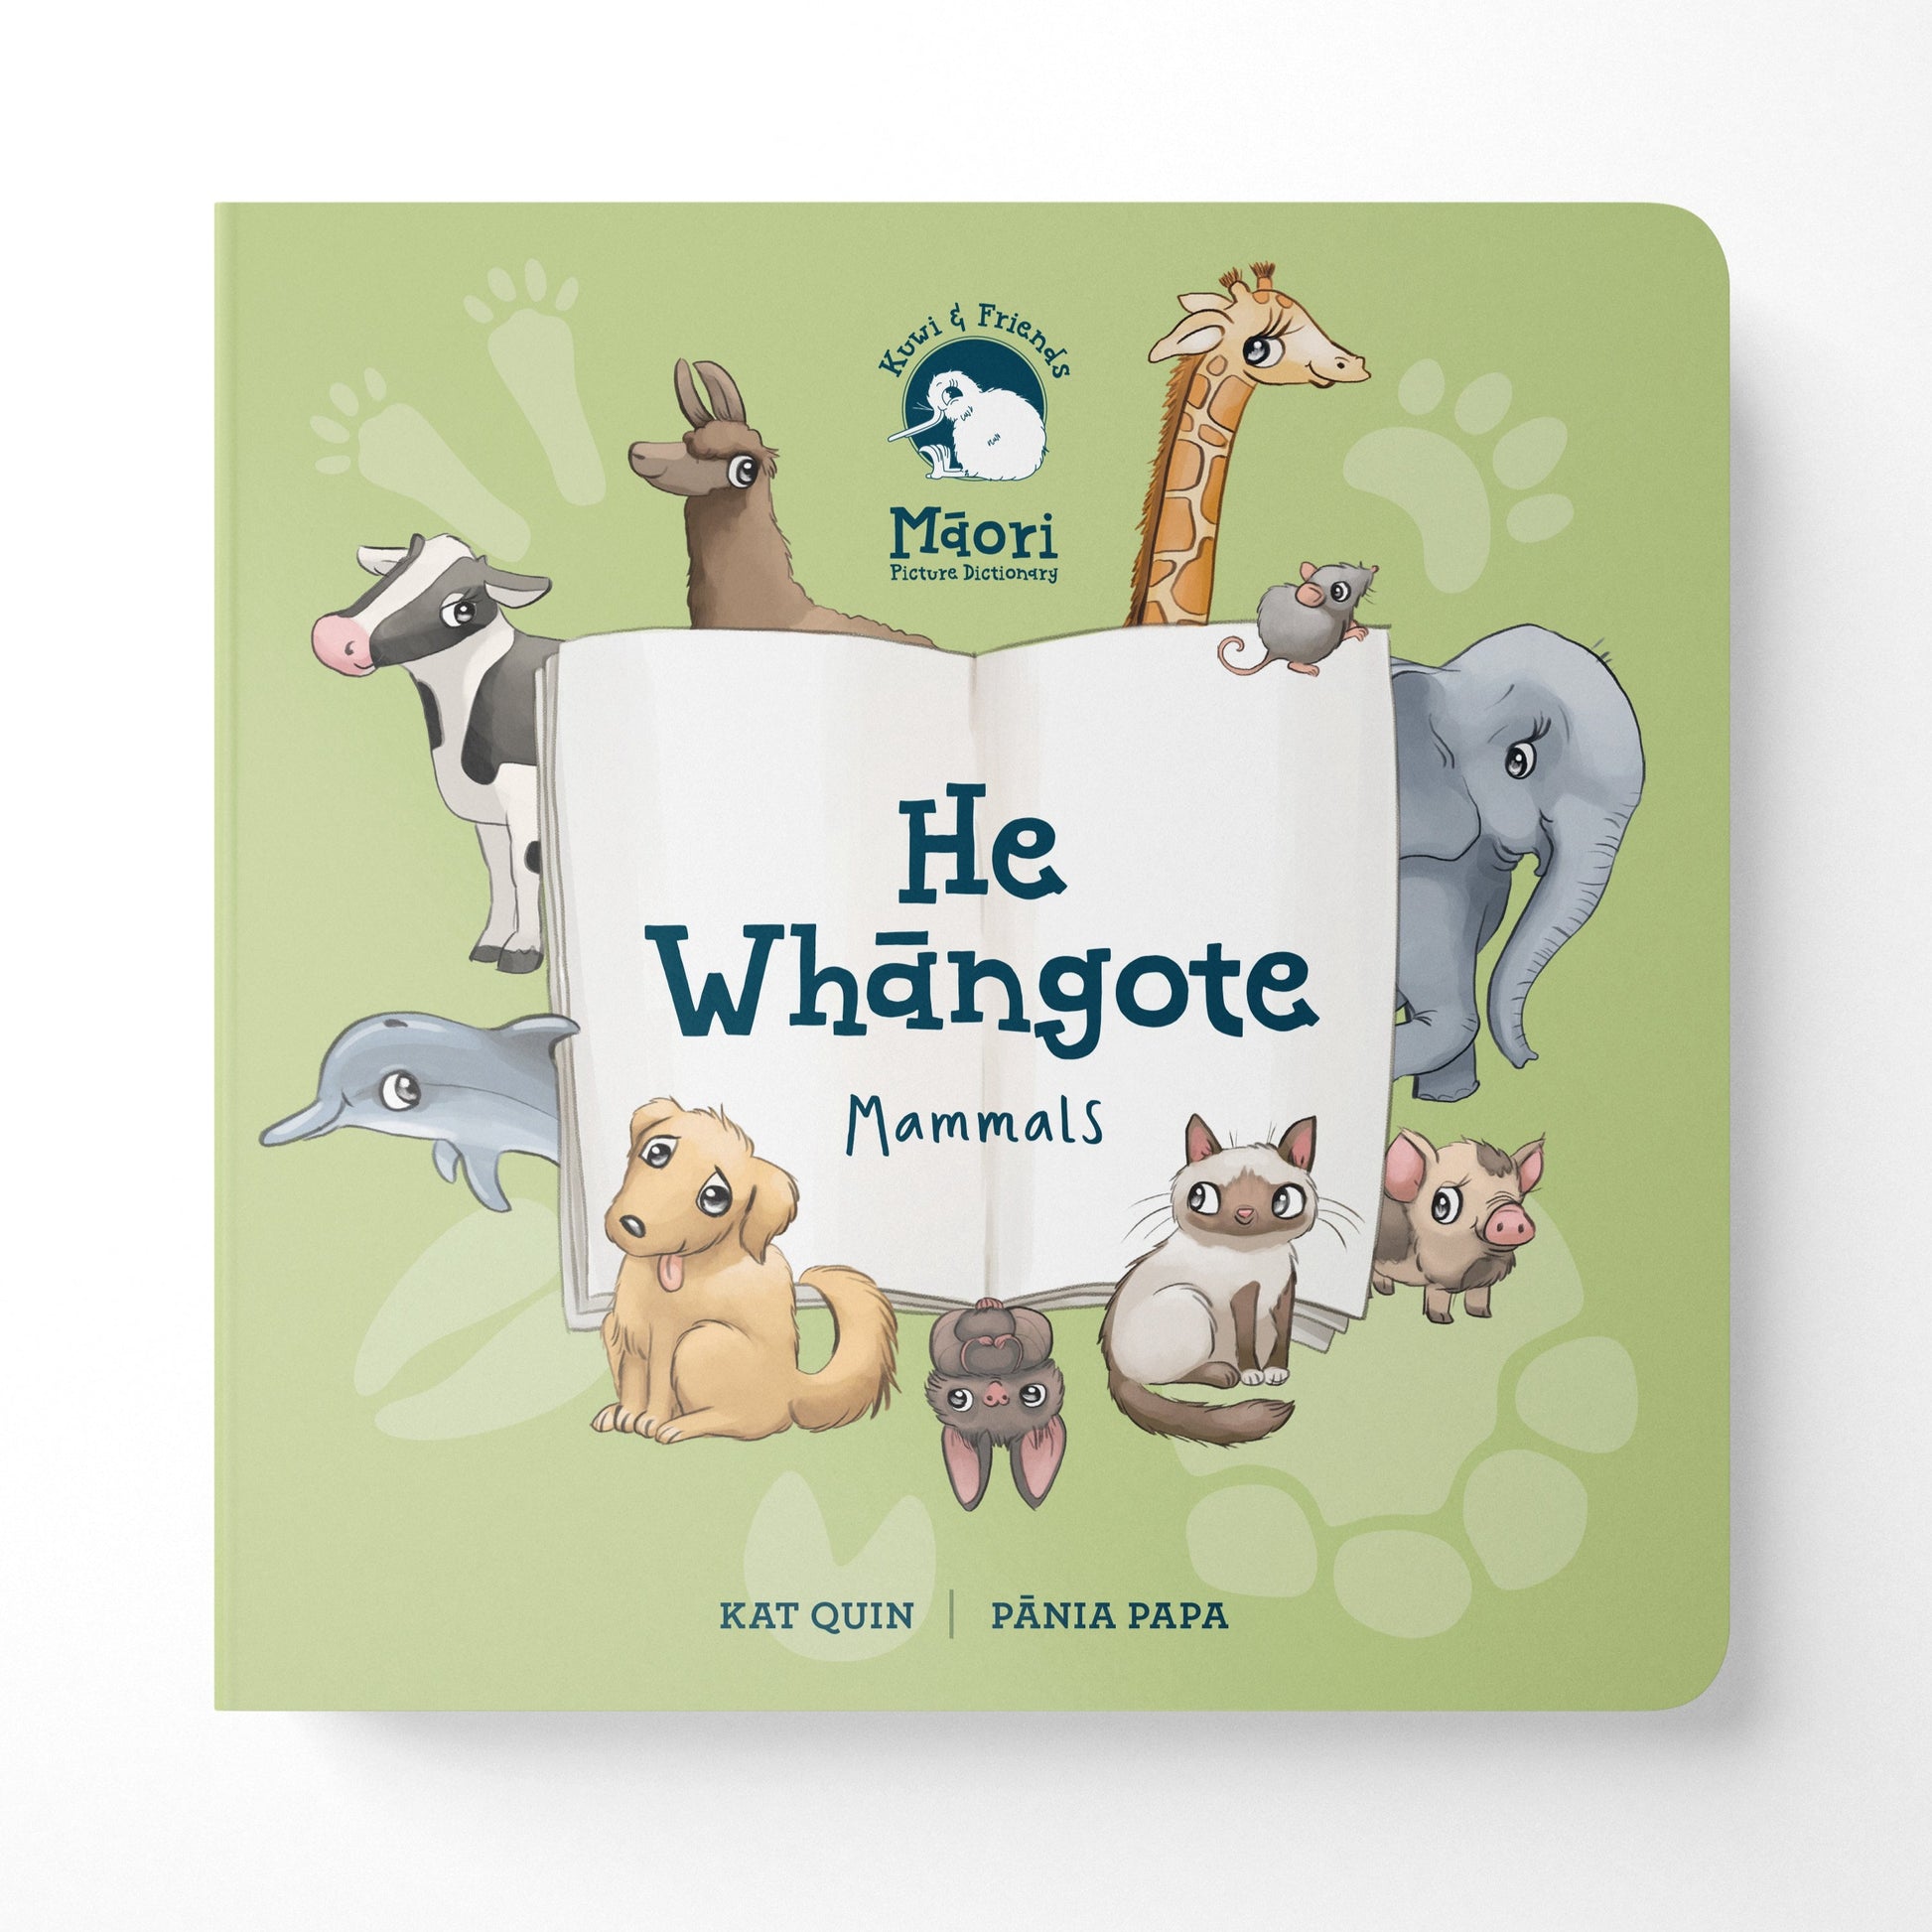 Kuwi & Friends: He Whāngote - Mammals - Board Book. A variety of wild and pet mammals against a green background.